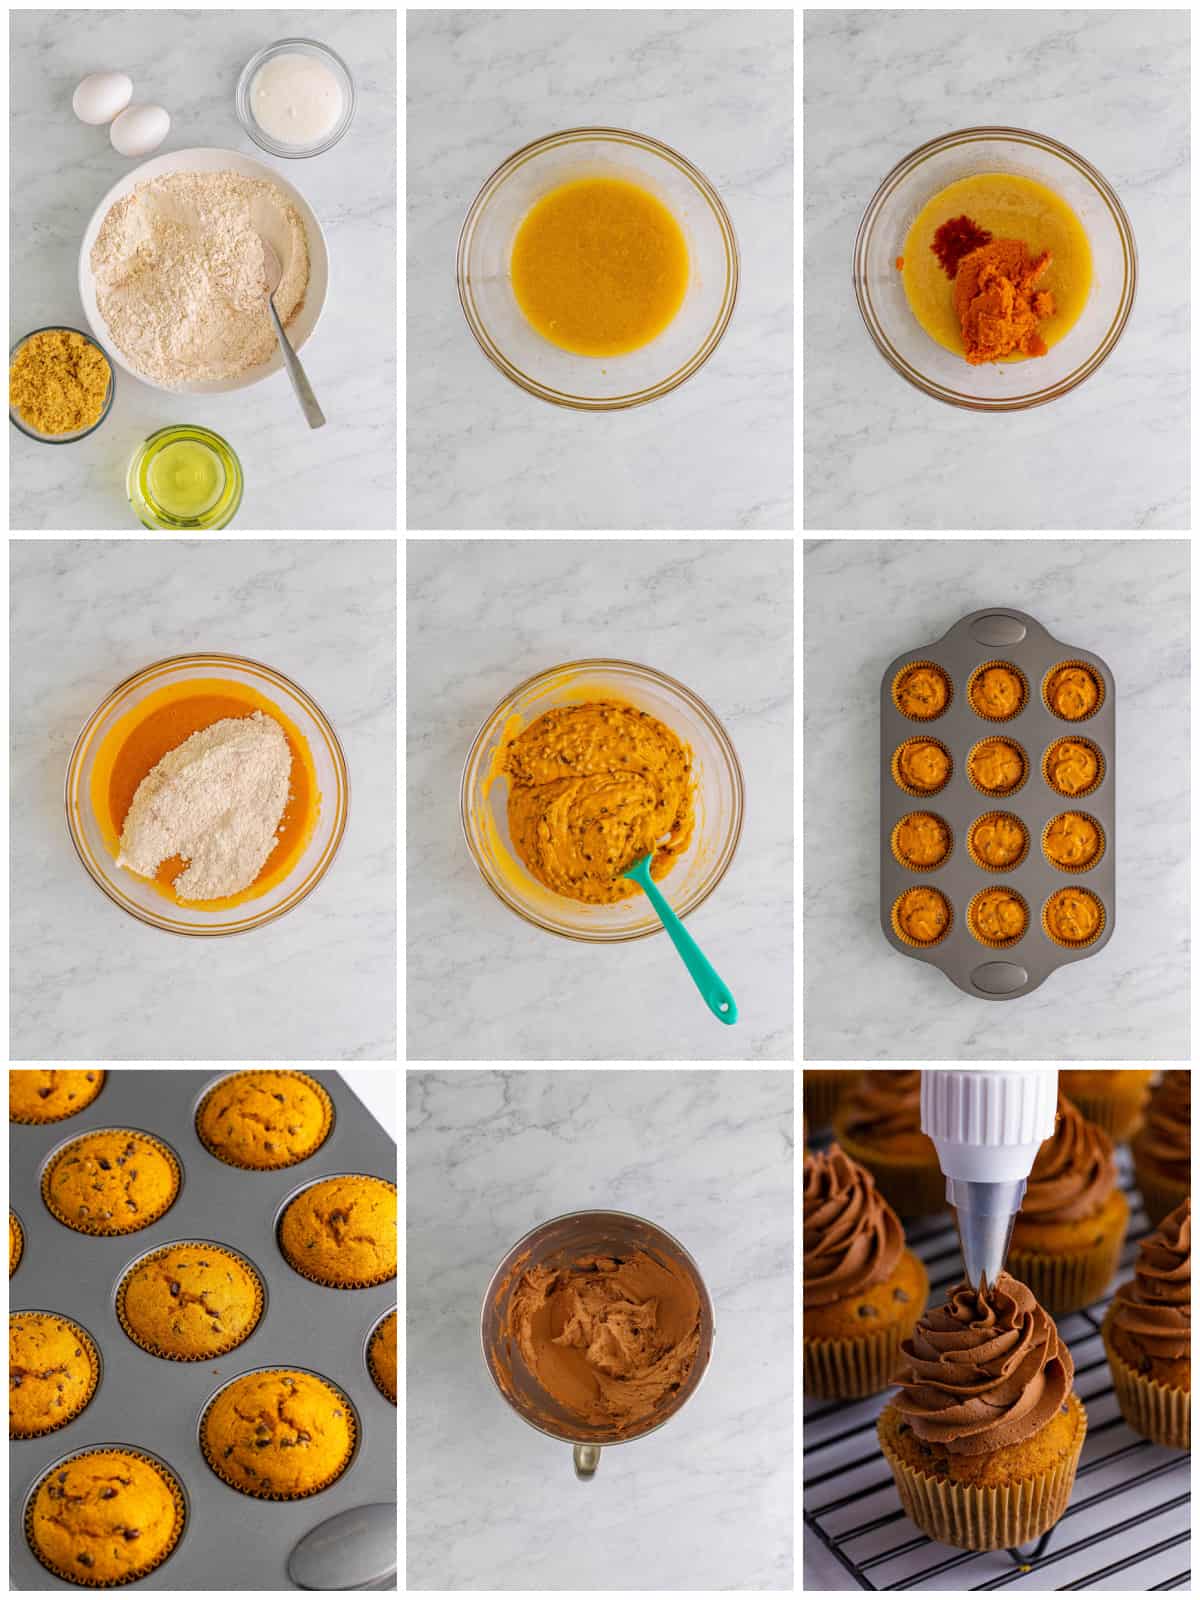 Step by step photos on how to make Chocolate Chip Pumpkin Cupcakes.